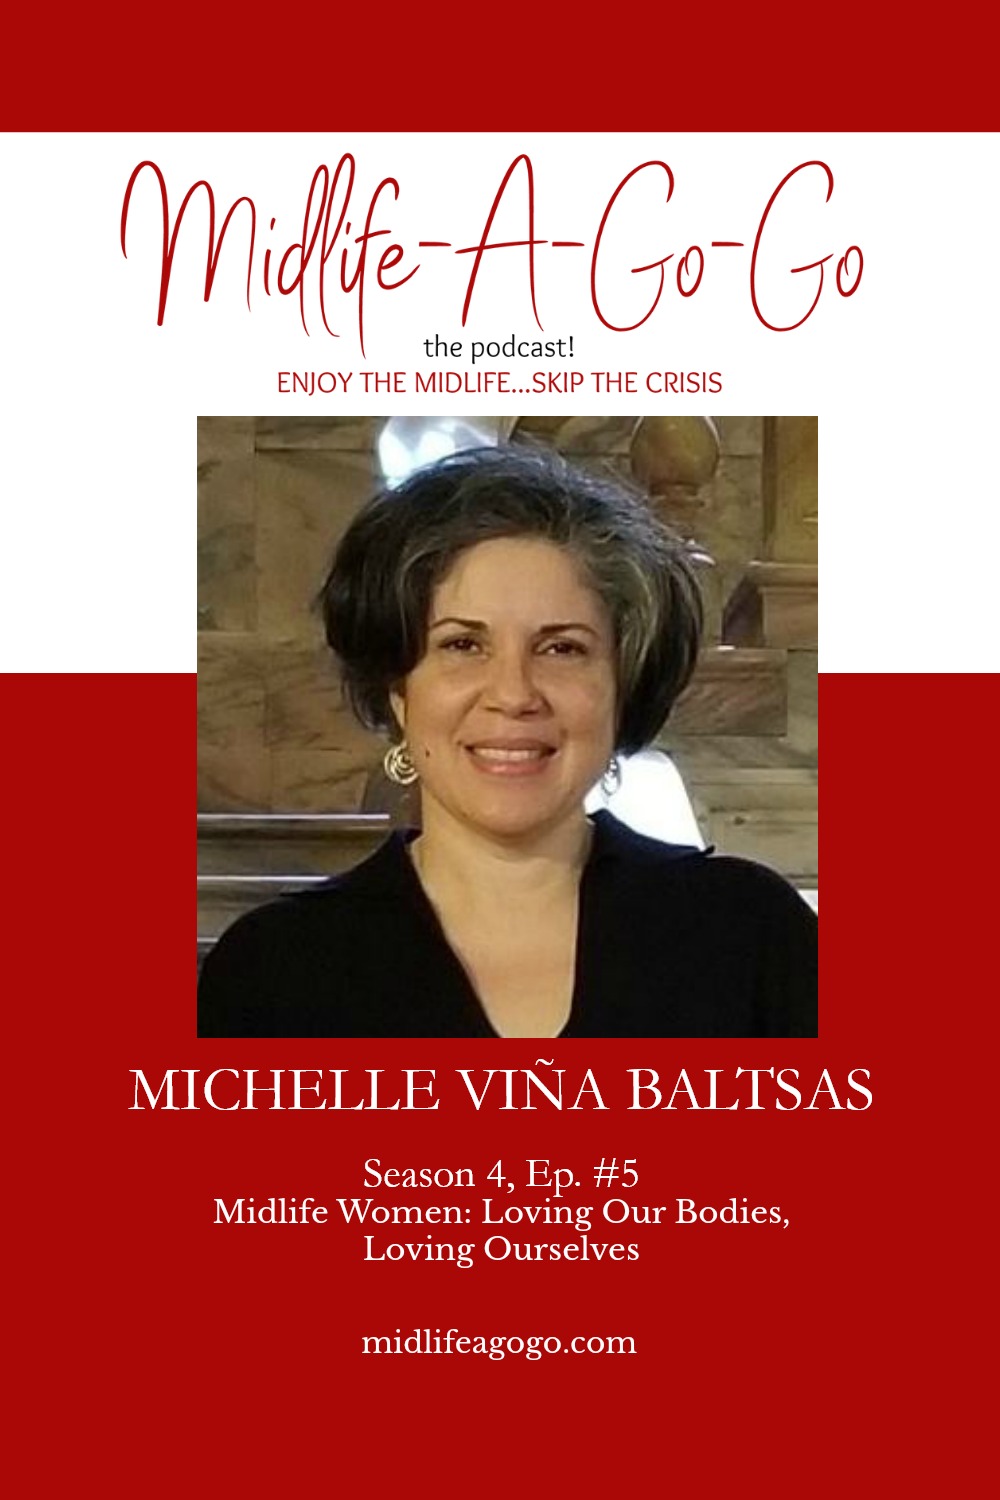 Midlife Woman: Loving Our Bodies, Loving Ourselves with Michelle Viña Baltsas